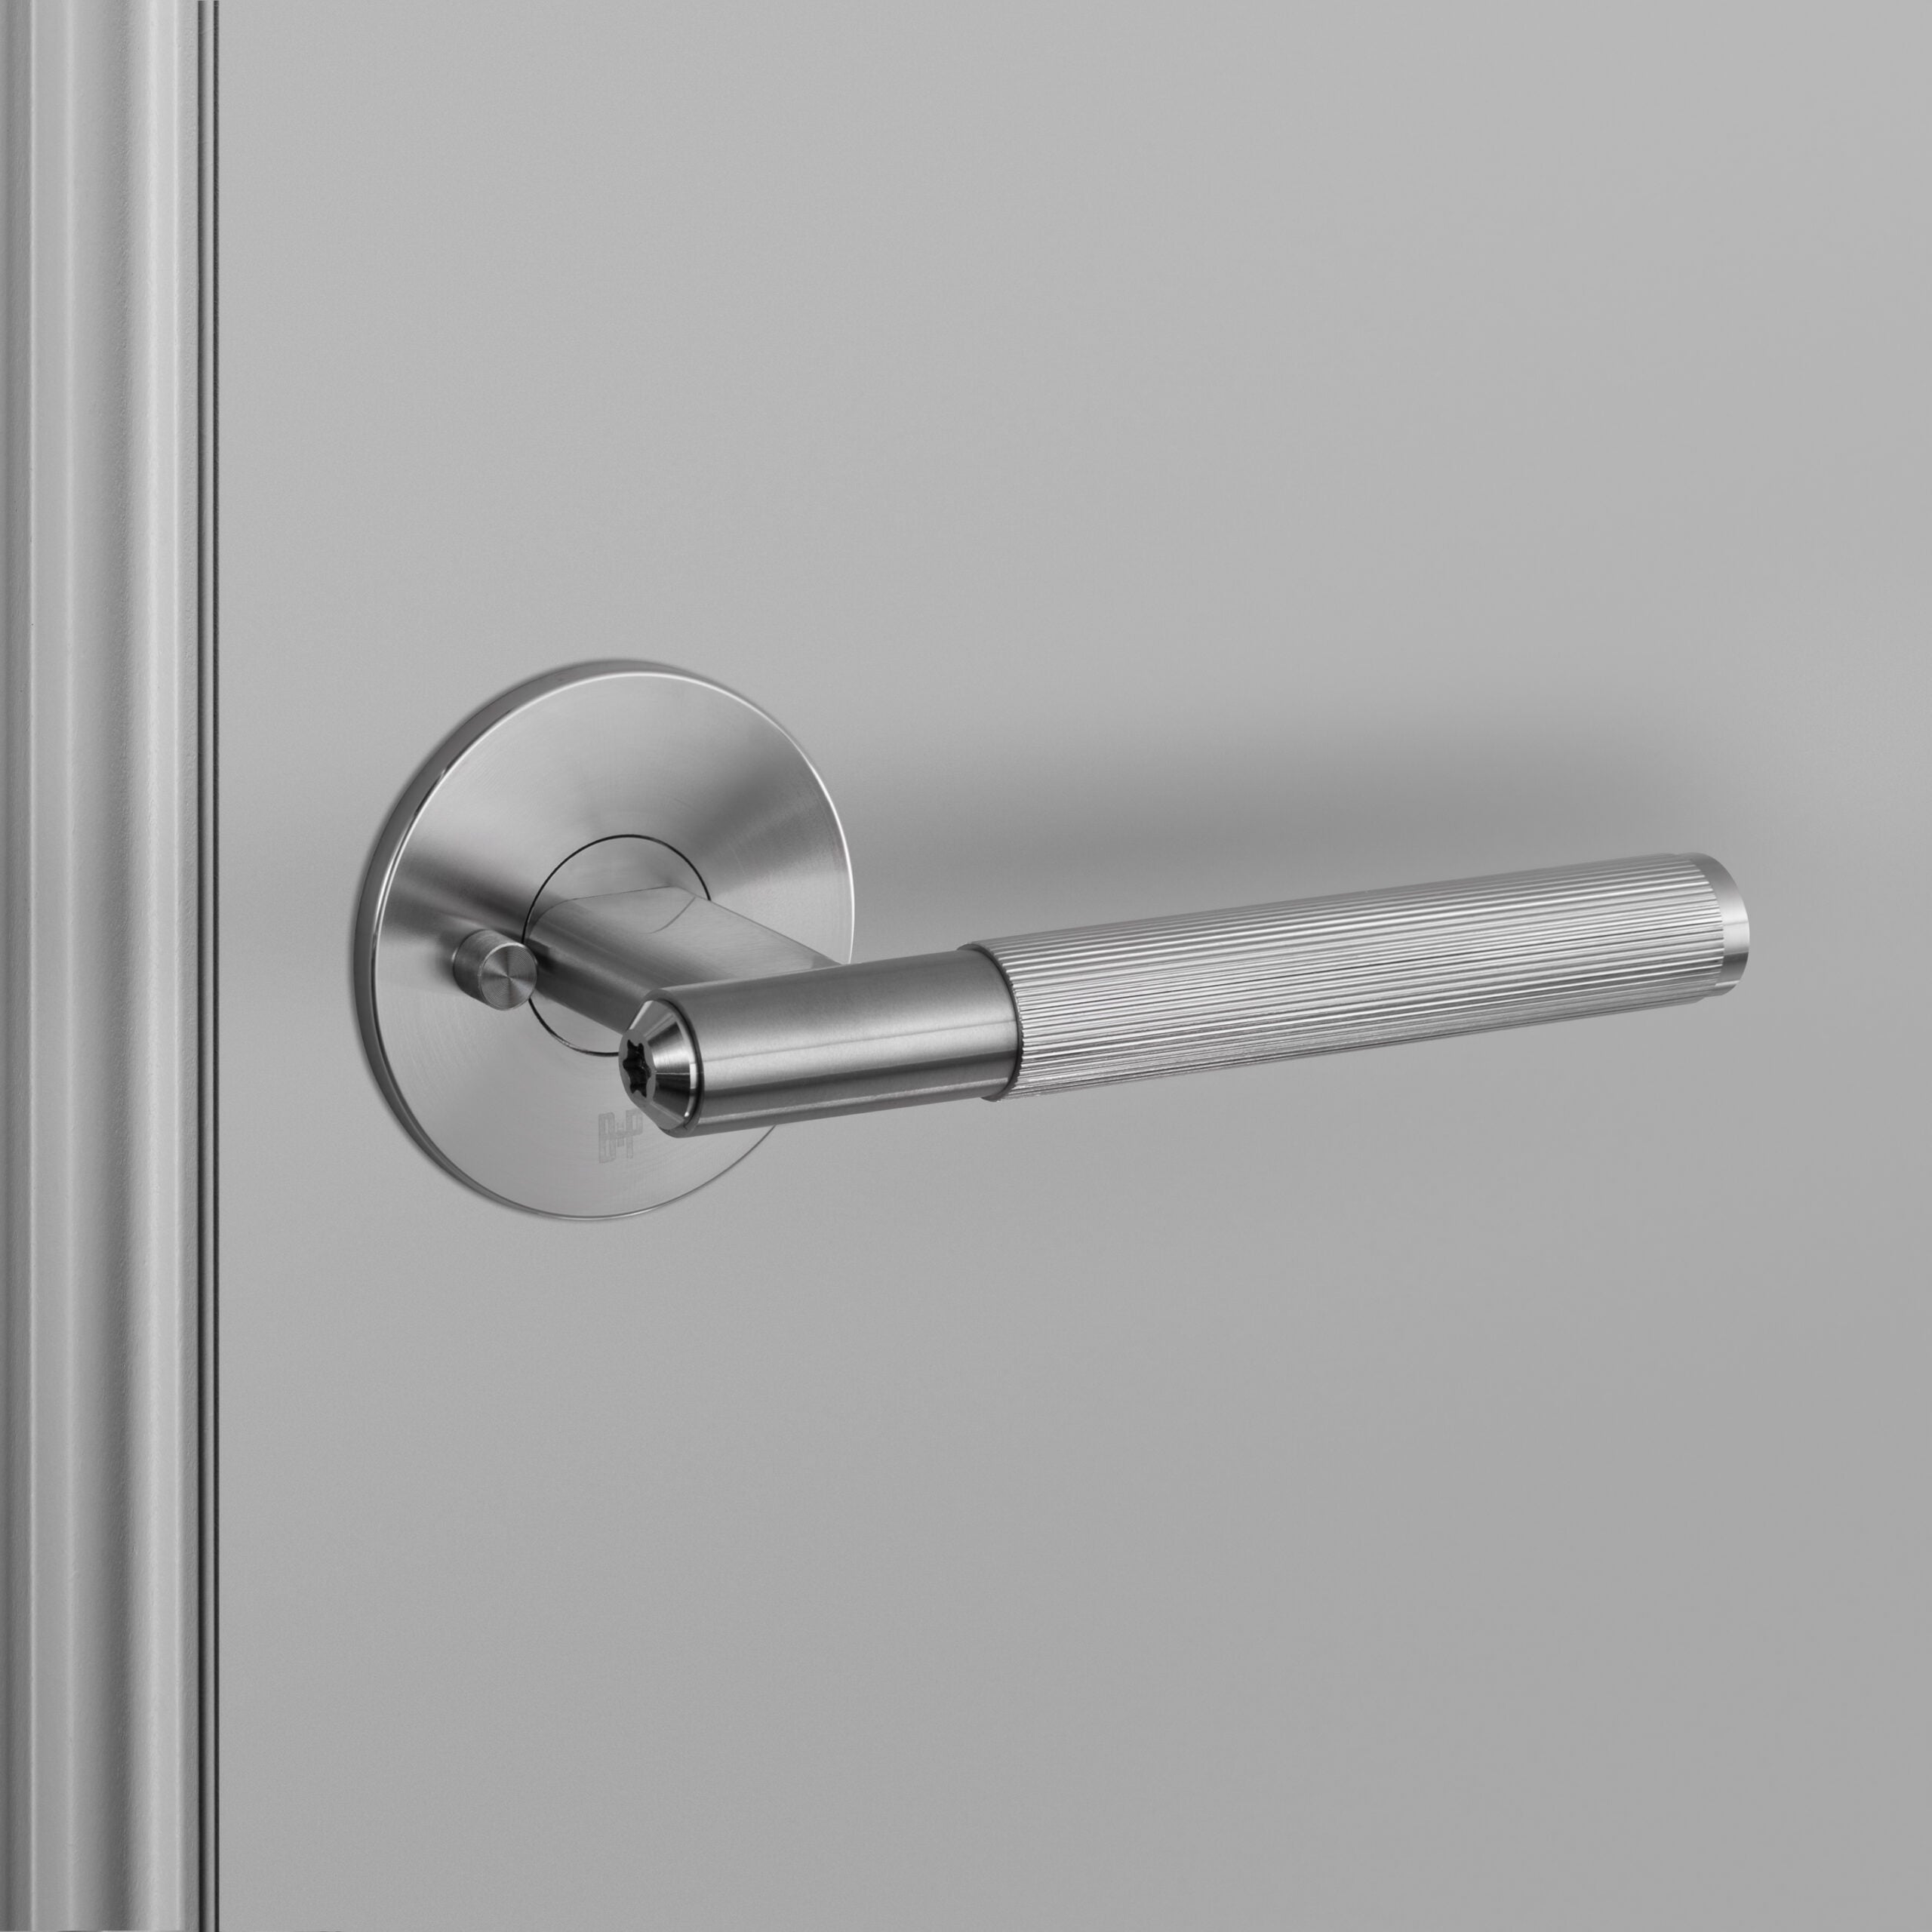 Buster + Punch Conventional Door Handle, Linear Design - PRIVACY TYPE Hardware Buster + Punch   